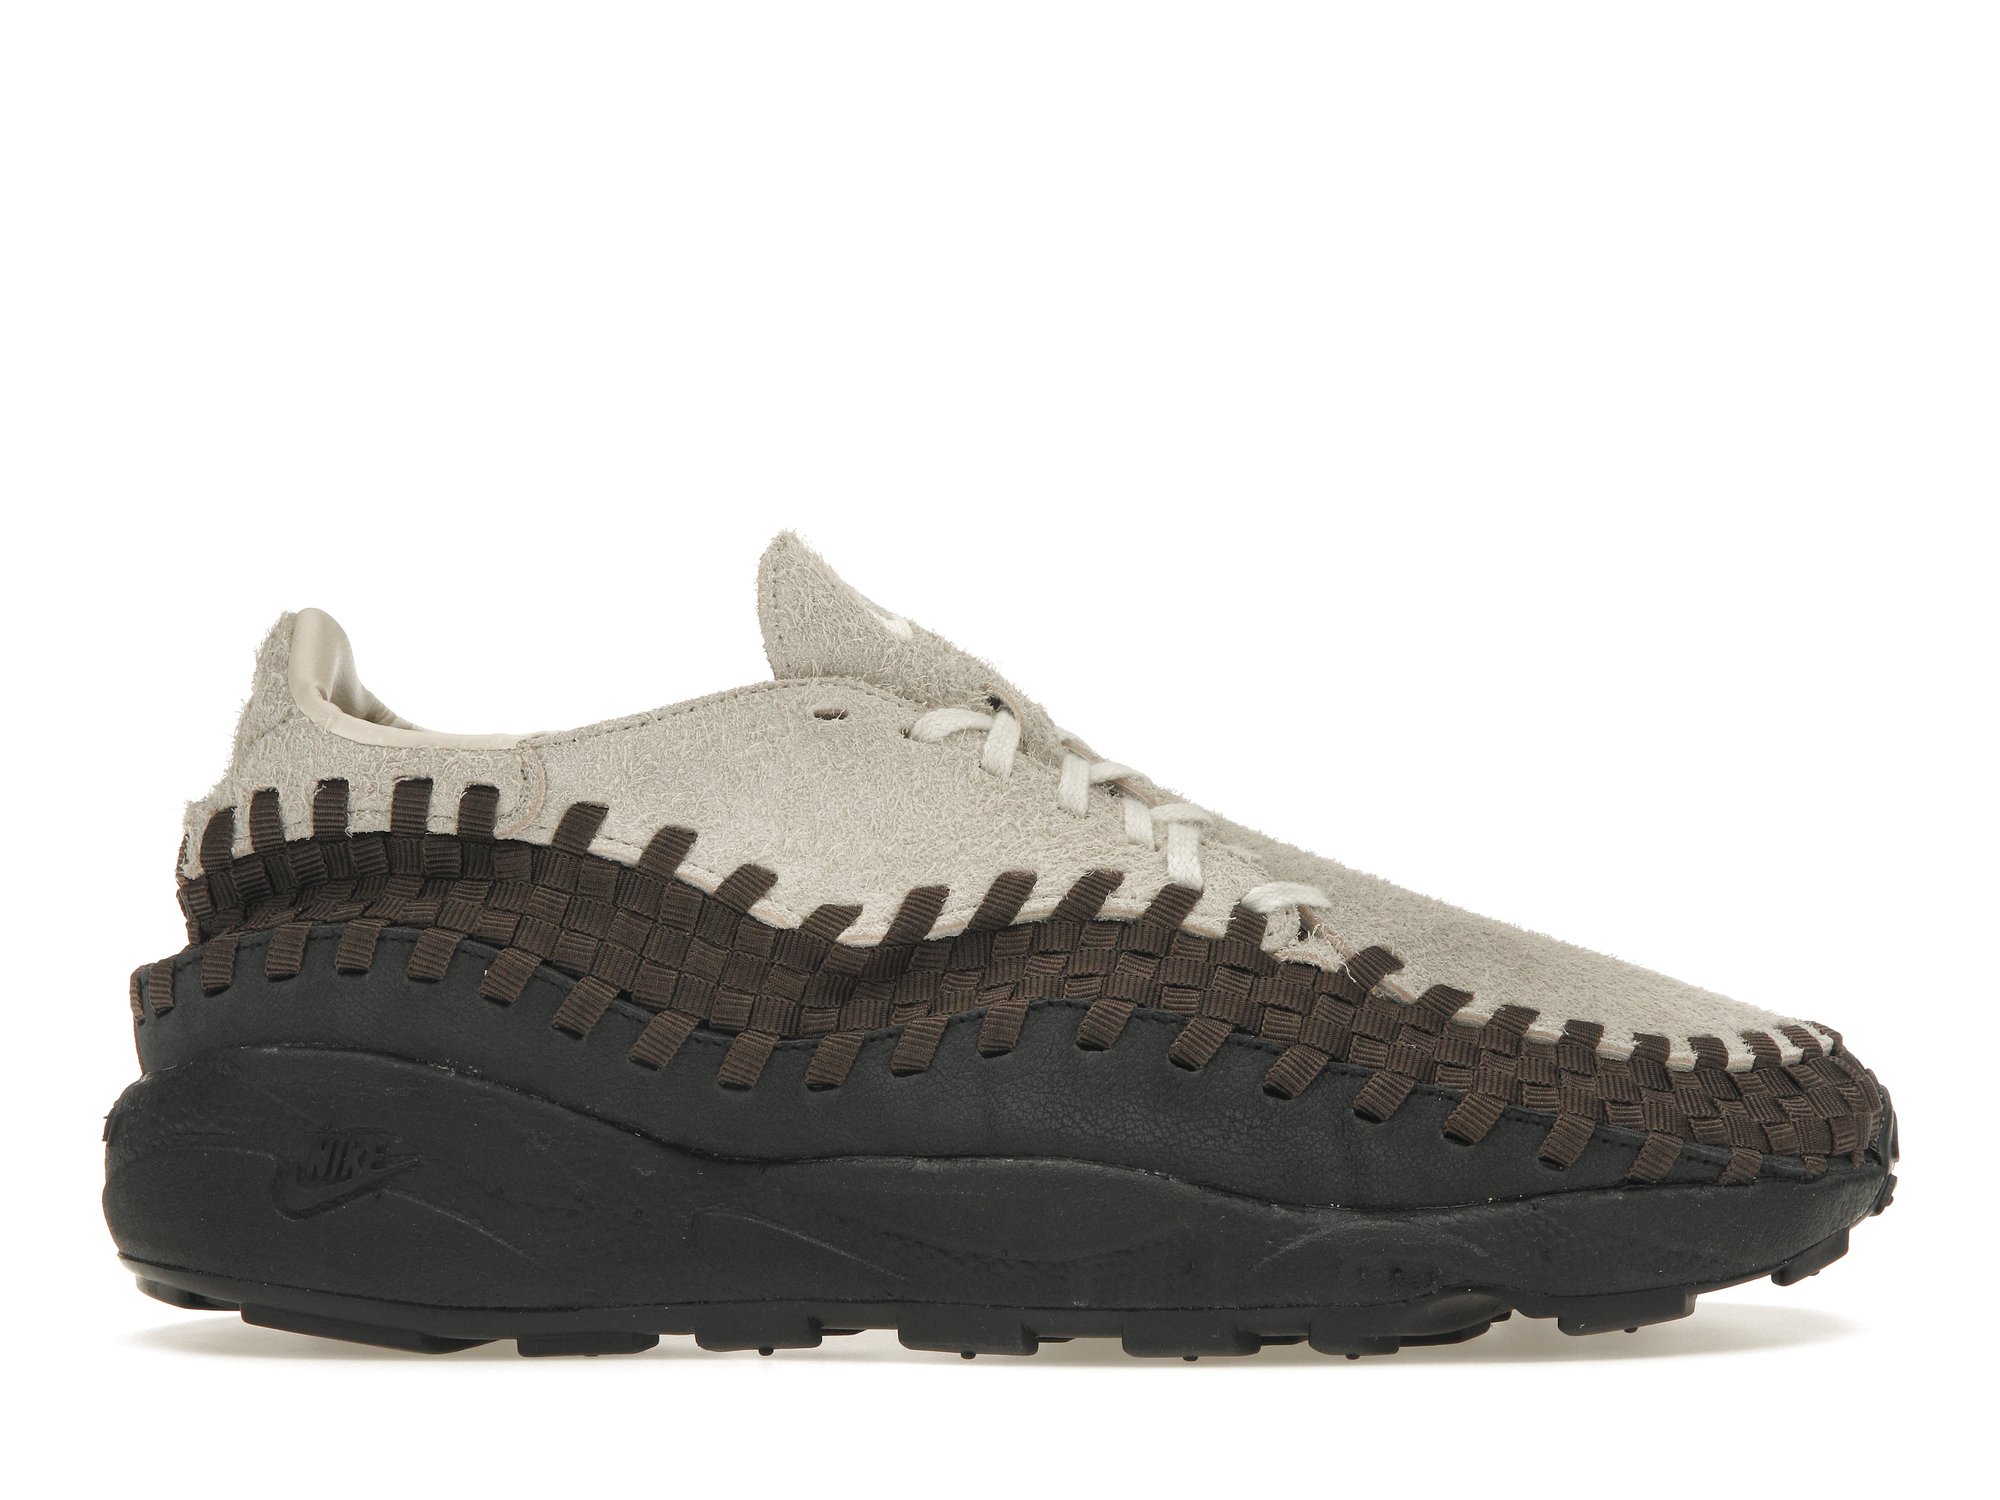 Nike Air Footscape Woven Light Orewood Brown Coconut Milk (Women's)